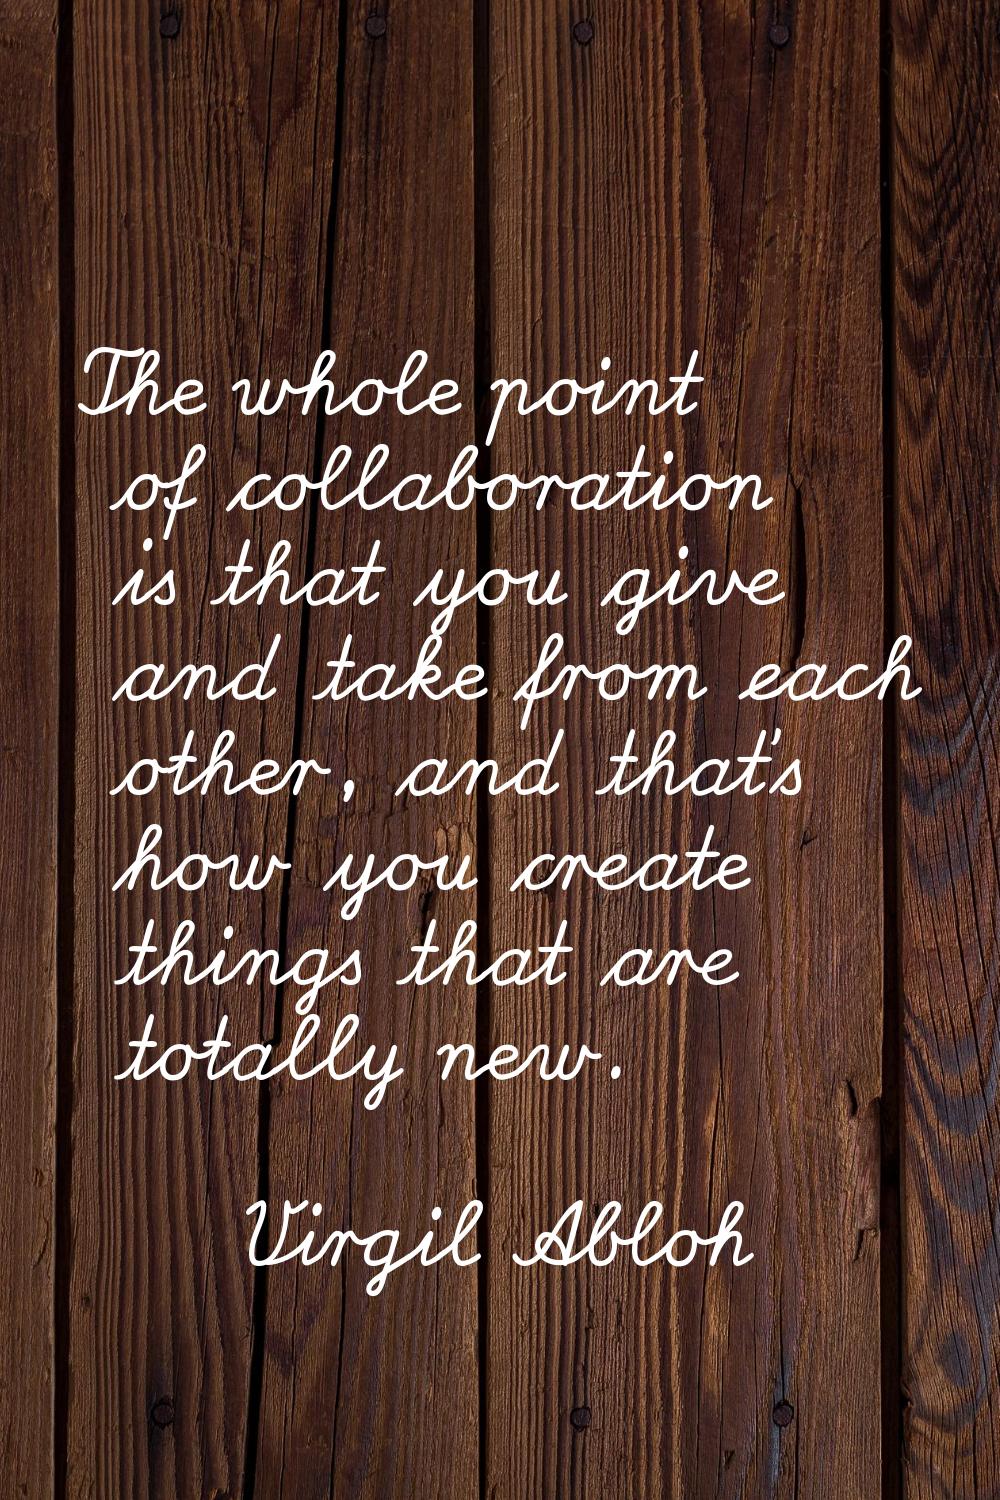 The whole point of collaboration is that you give and take from each other, and that's how you crea